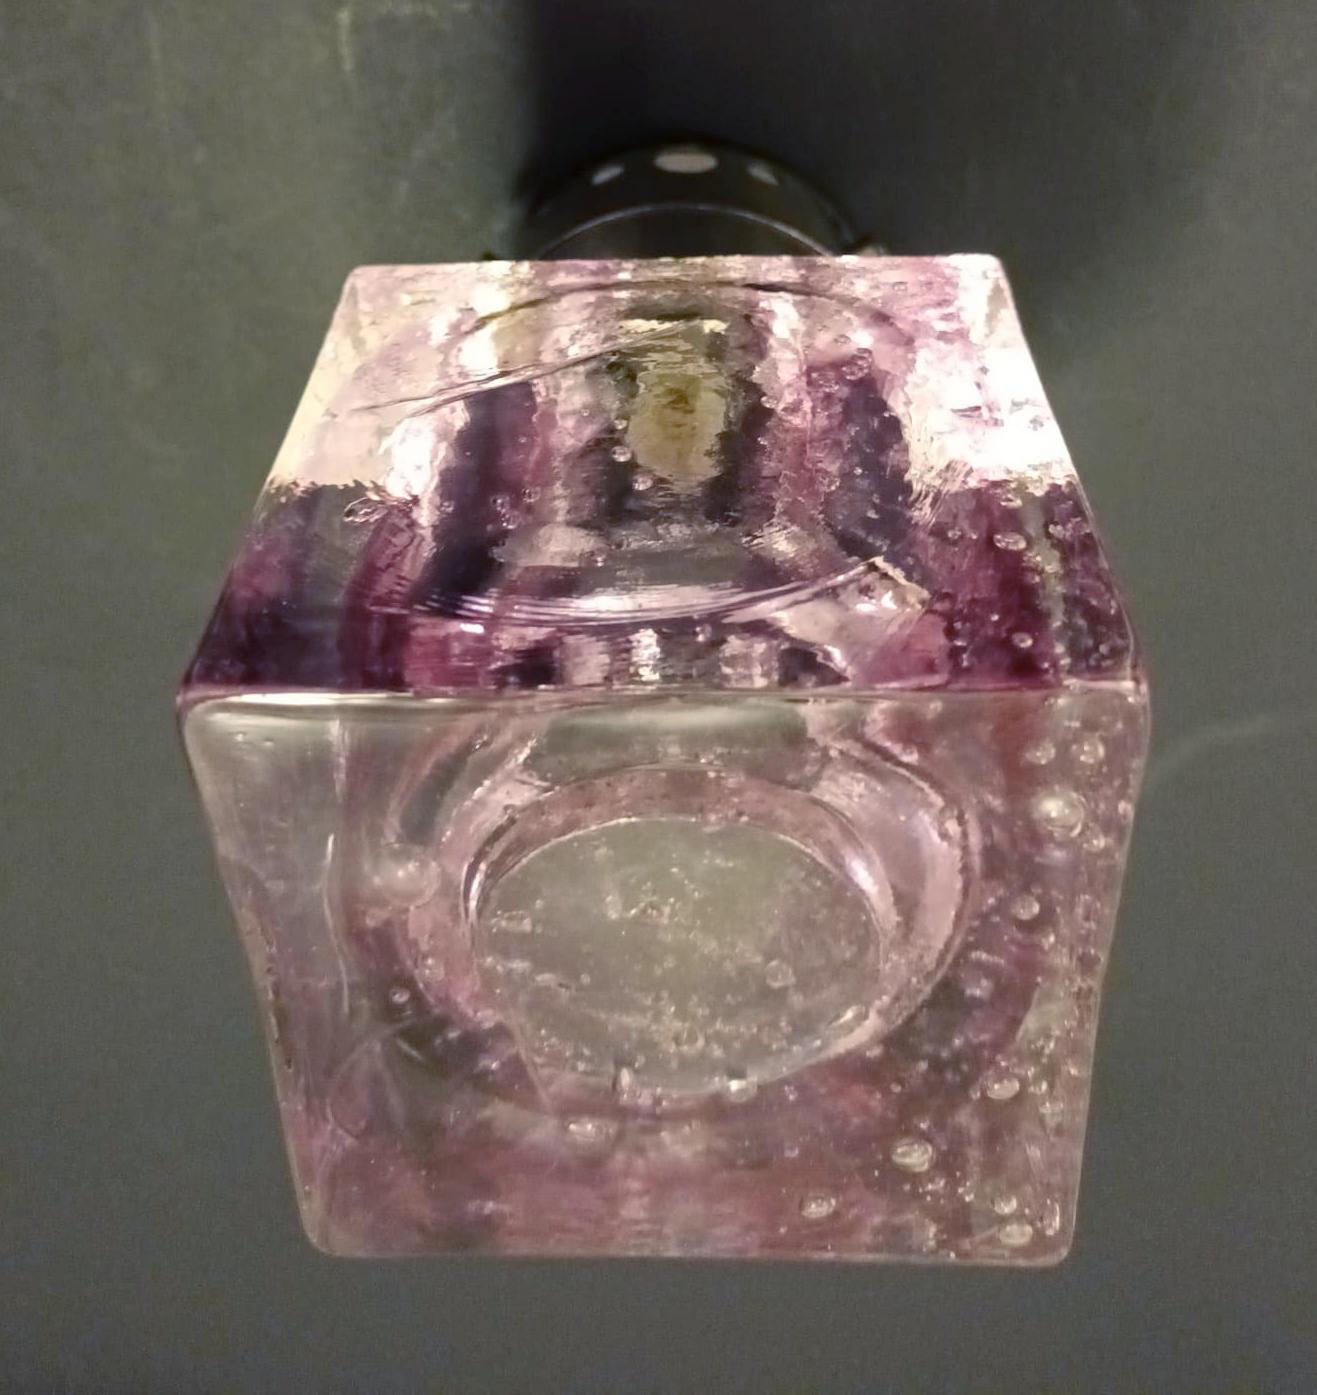 Vintage Italian spot light which can be used as a wall light or flush mount, with a single amethyst cubic Murano glass shade hand blown with bubbles inside the glass using bollicine technique, mounted on nickel frame / Made in Italy by Sciolari,